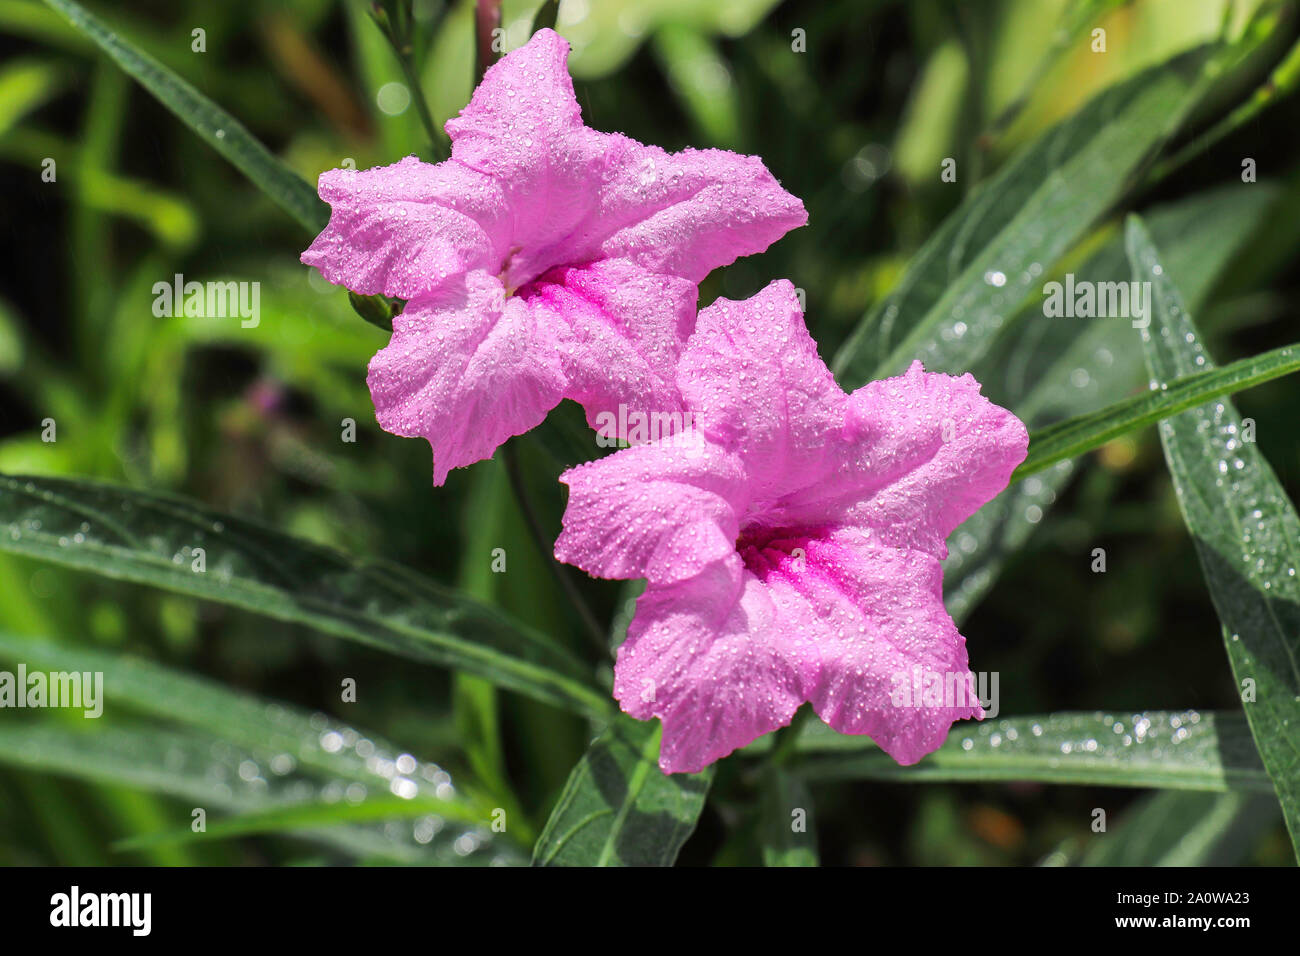 Beautiful pink flowers found in the evergreen forests of the wet zone. Stock Photo